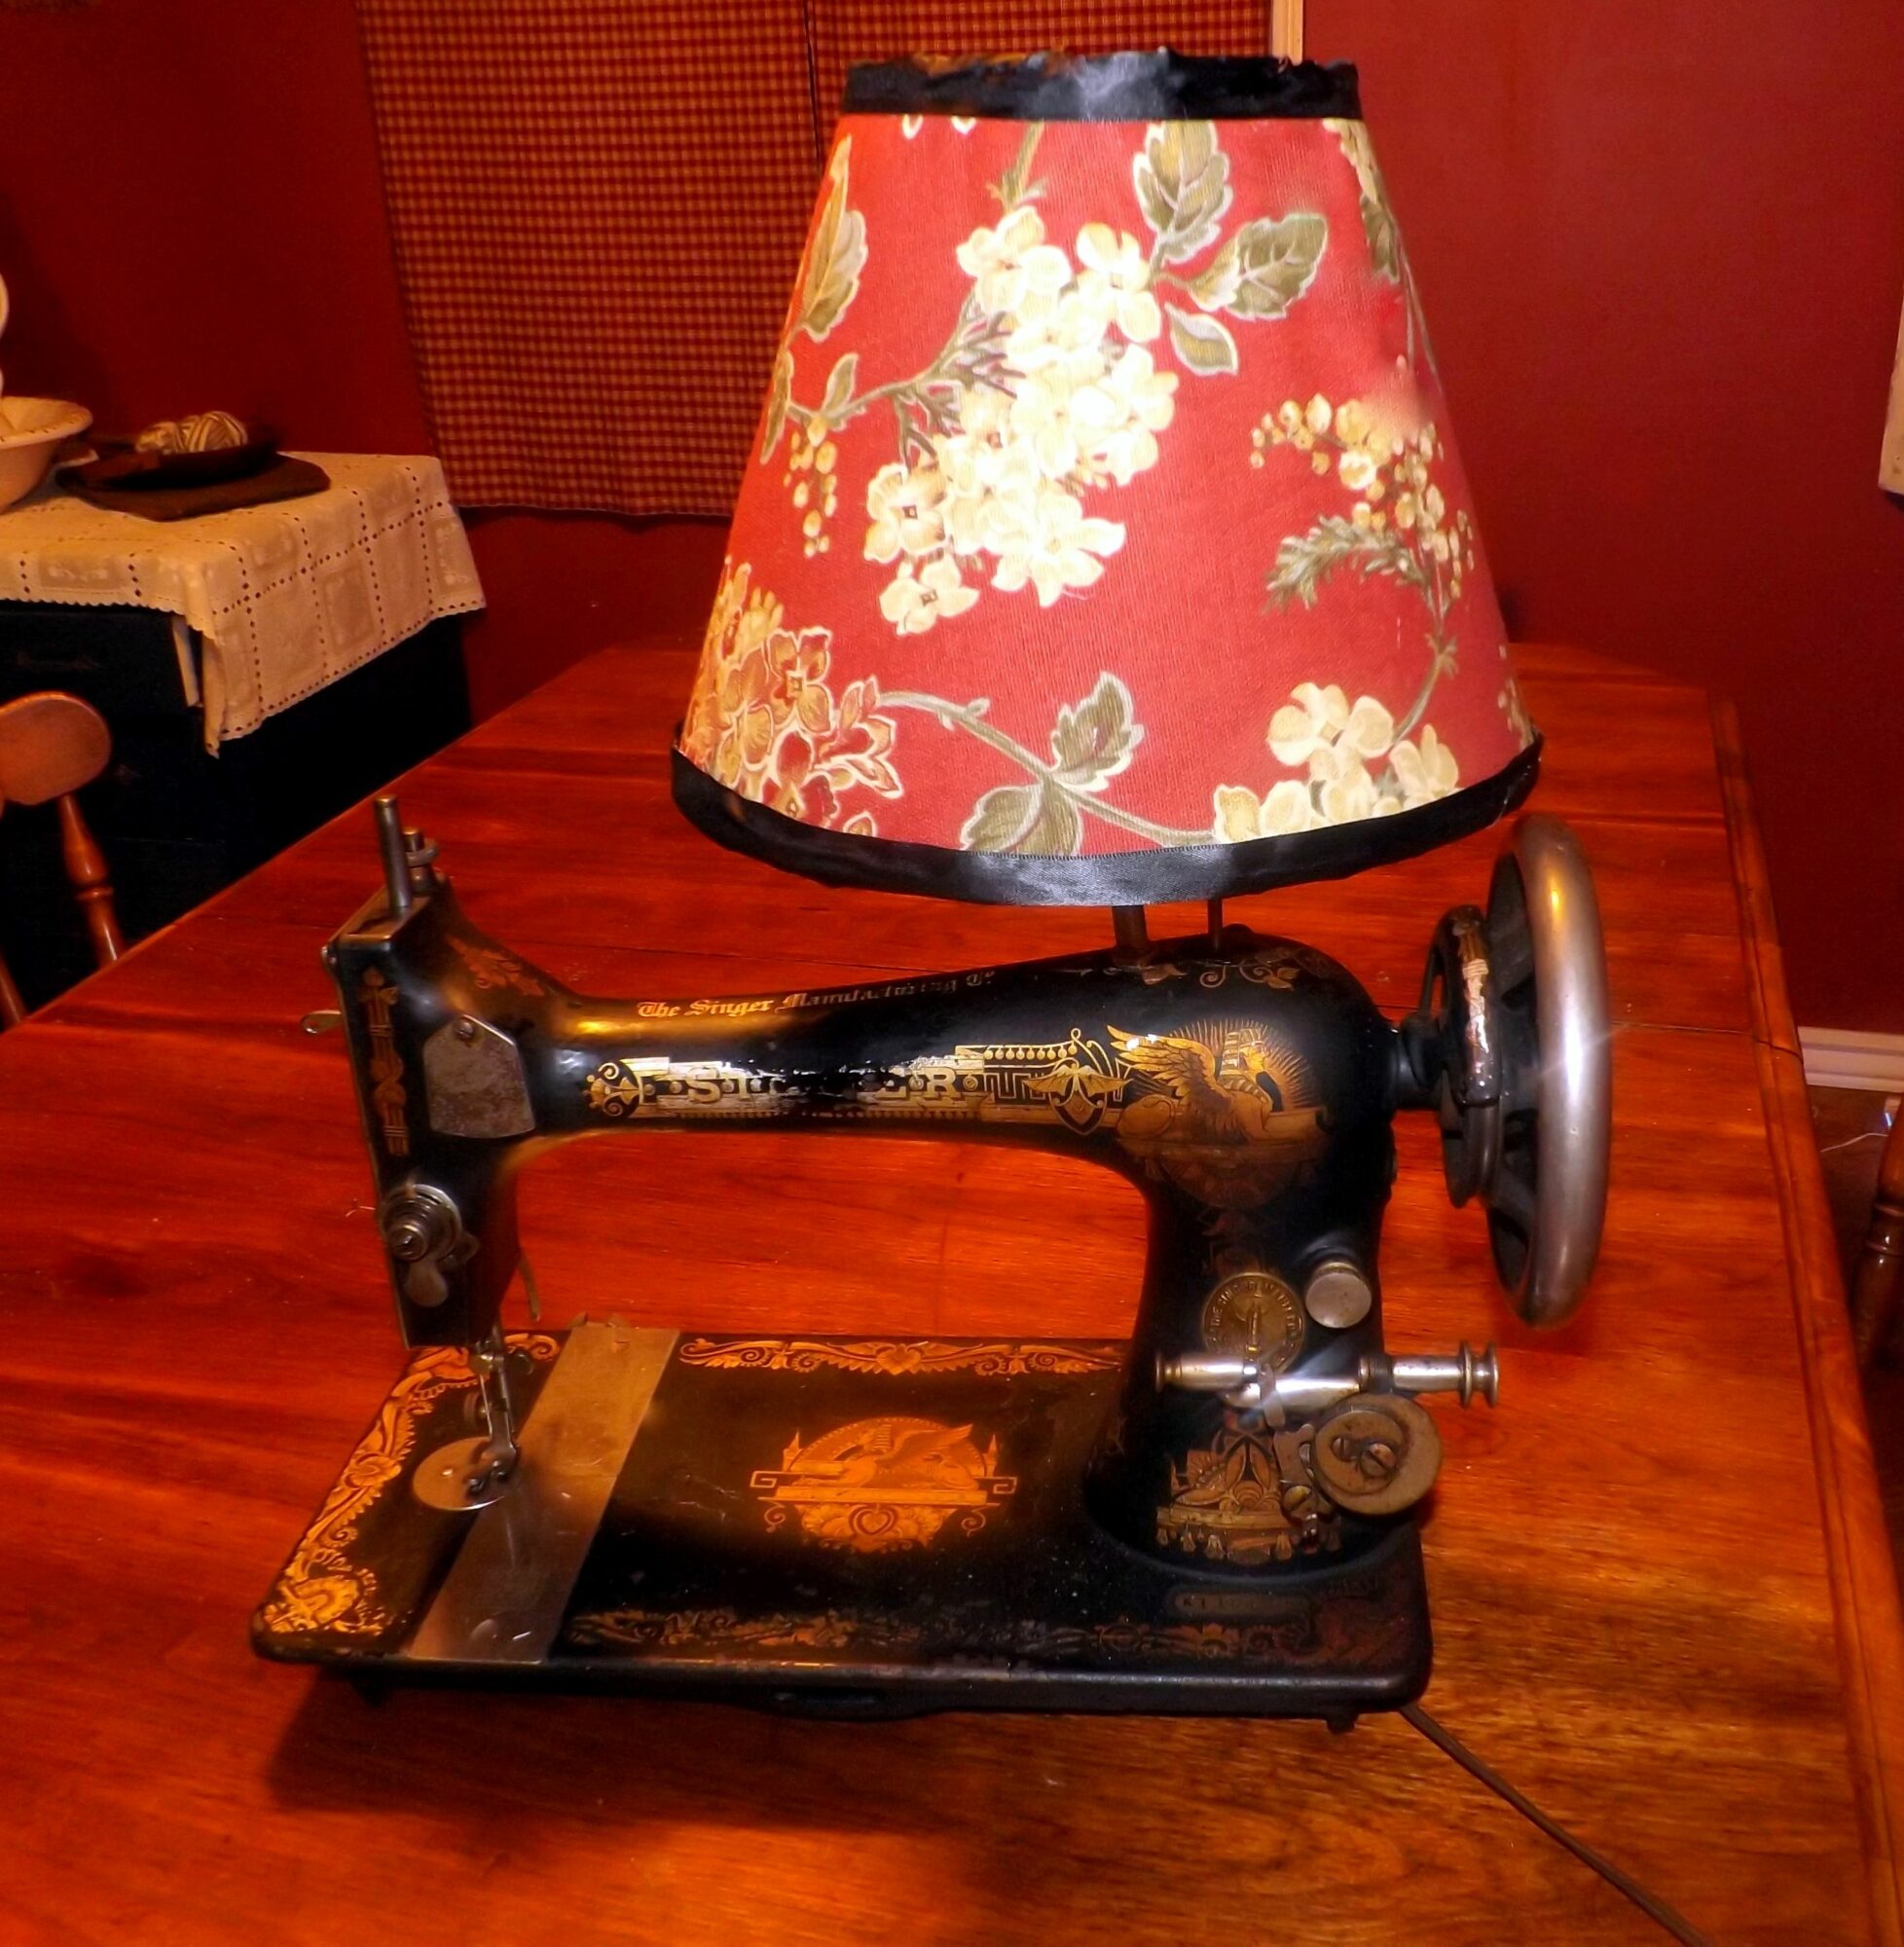 Sewing Machine Lamps - here some creative lamps made from antique sewing machines. #SewingMachines #Sewing